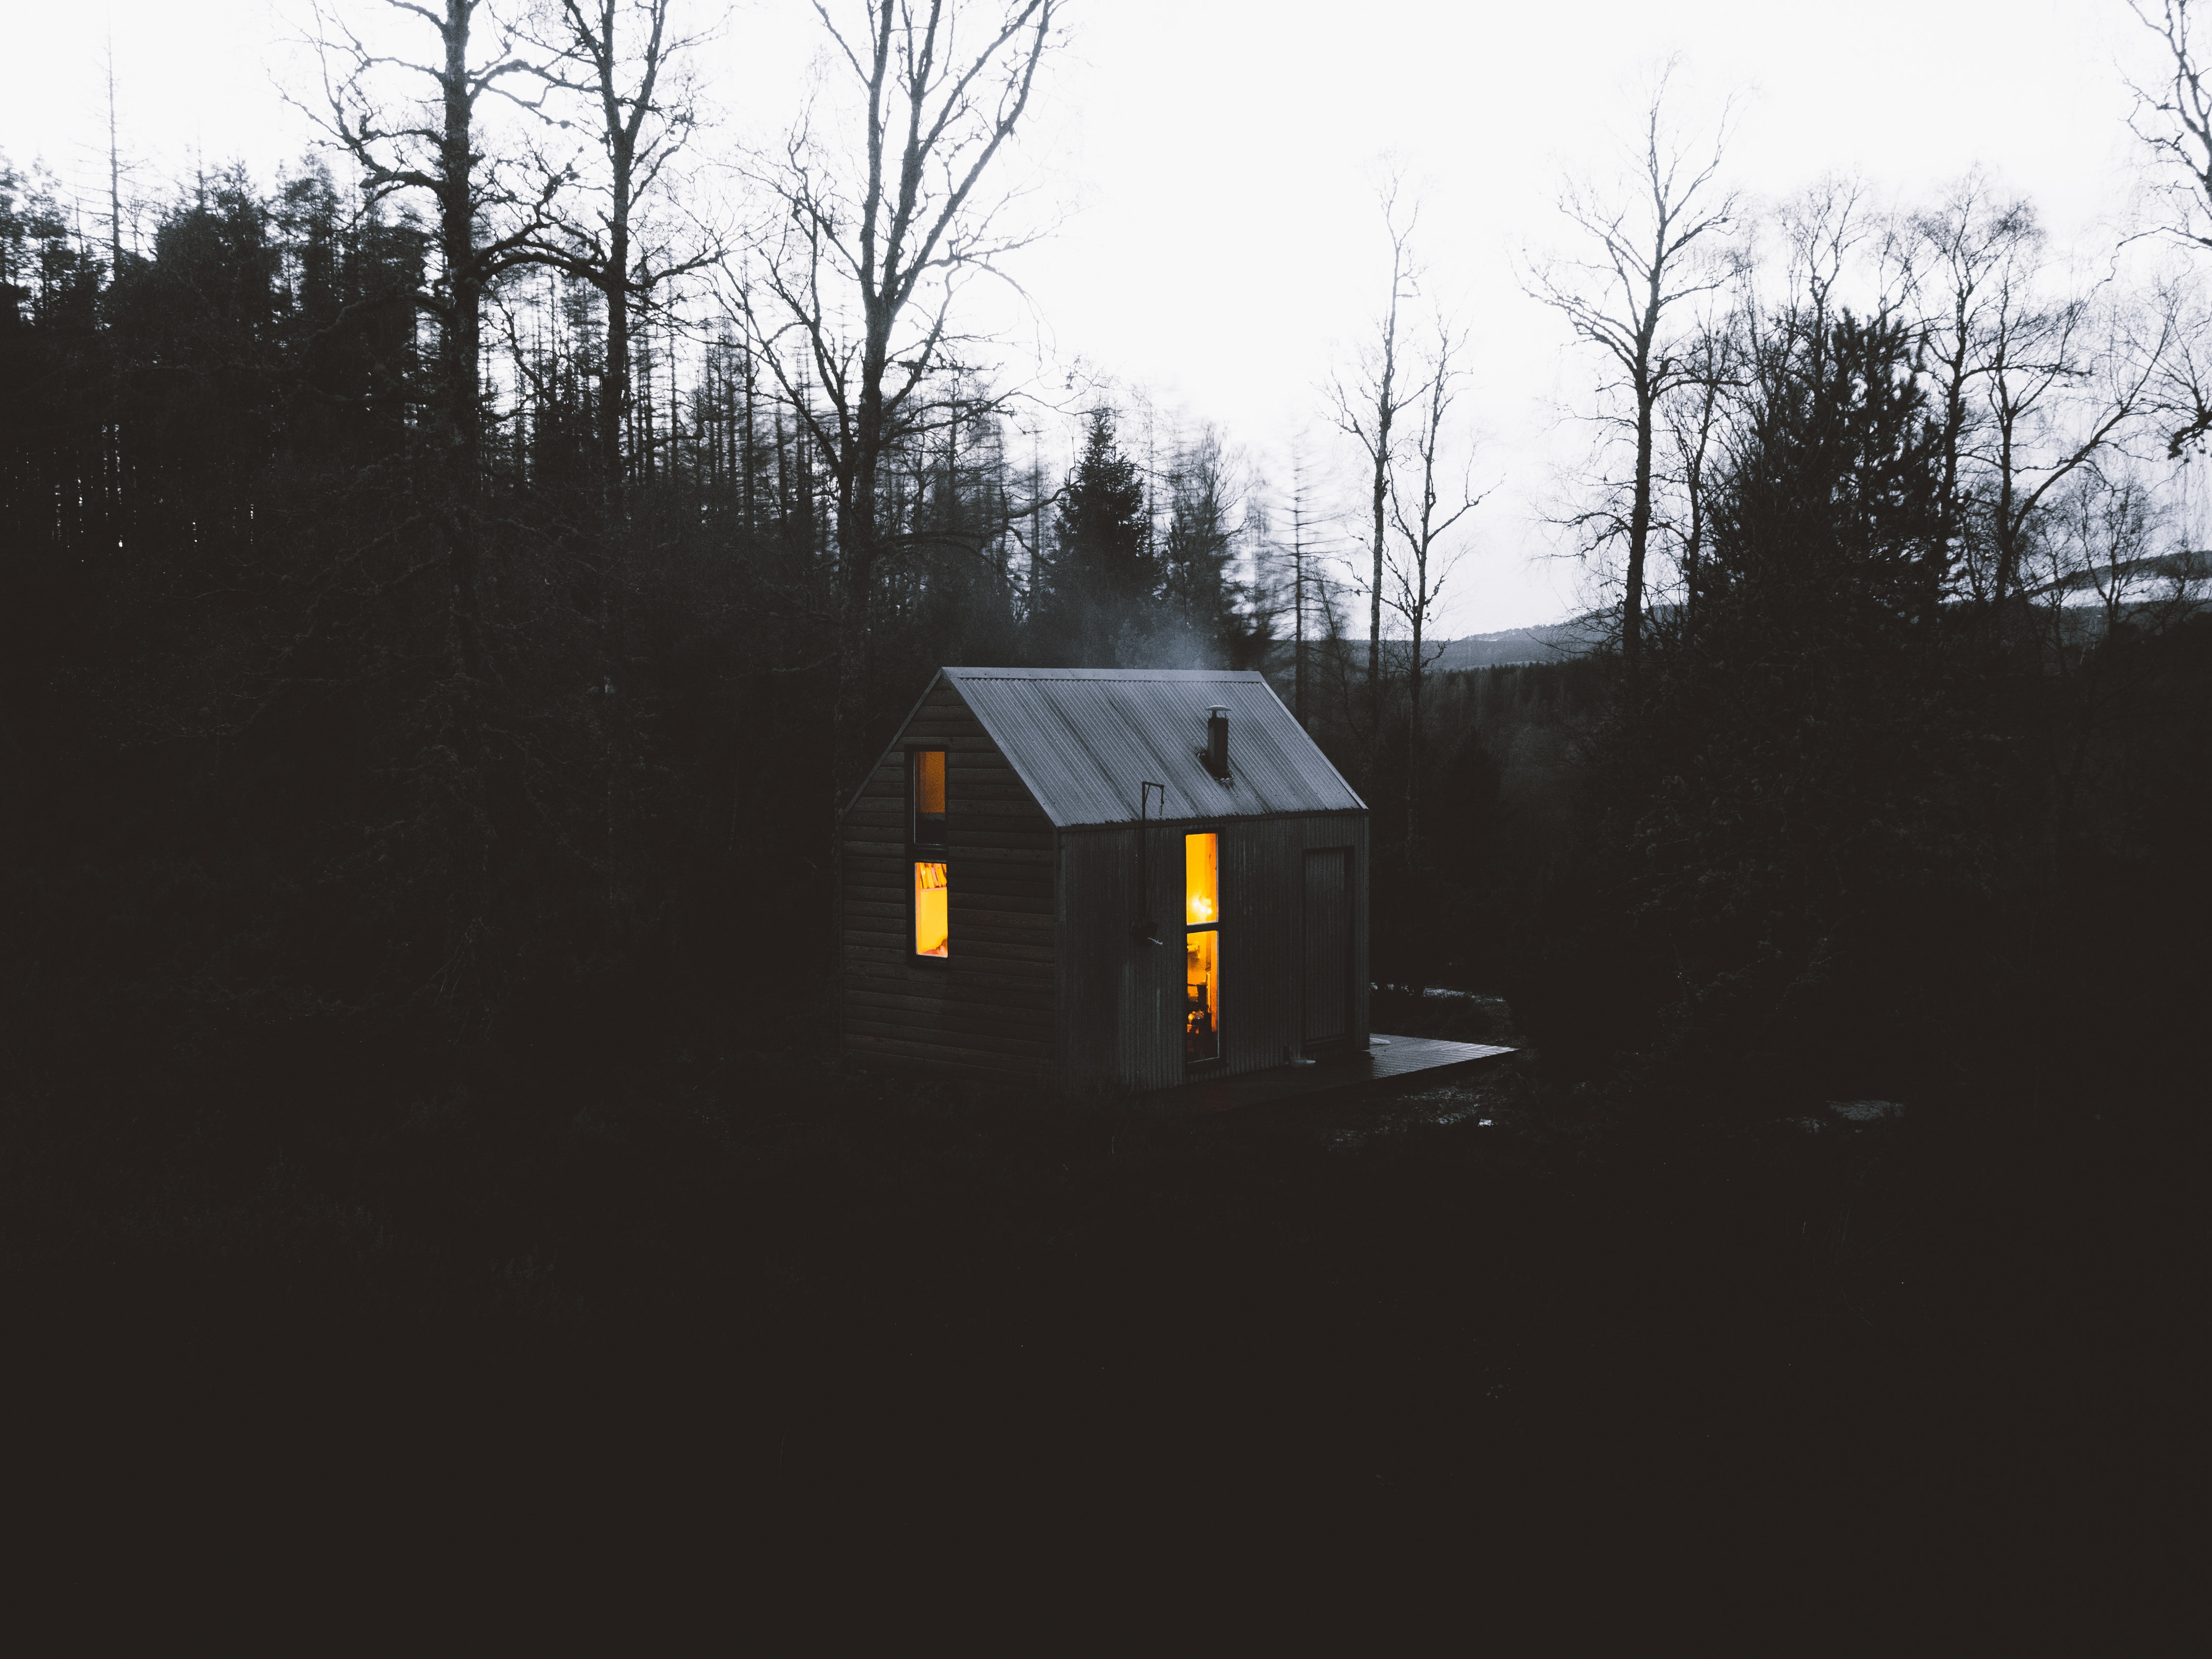 gray wooden house on forest